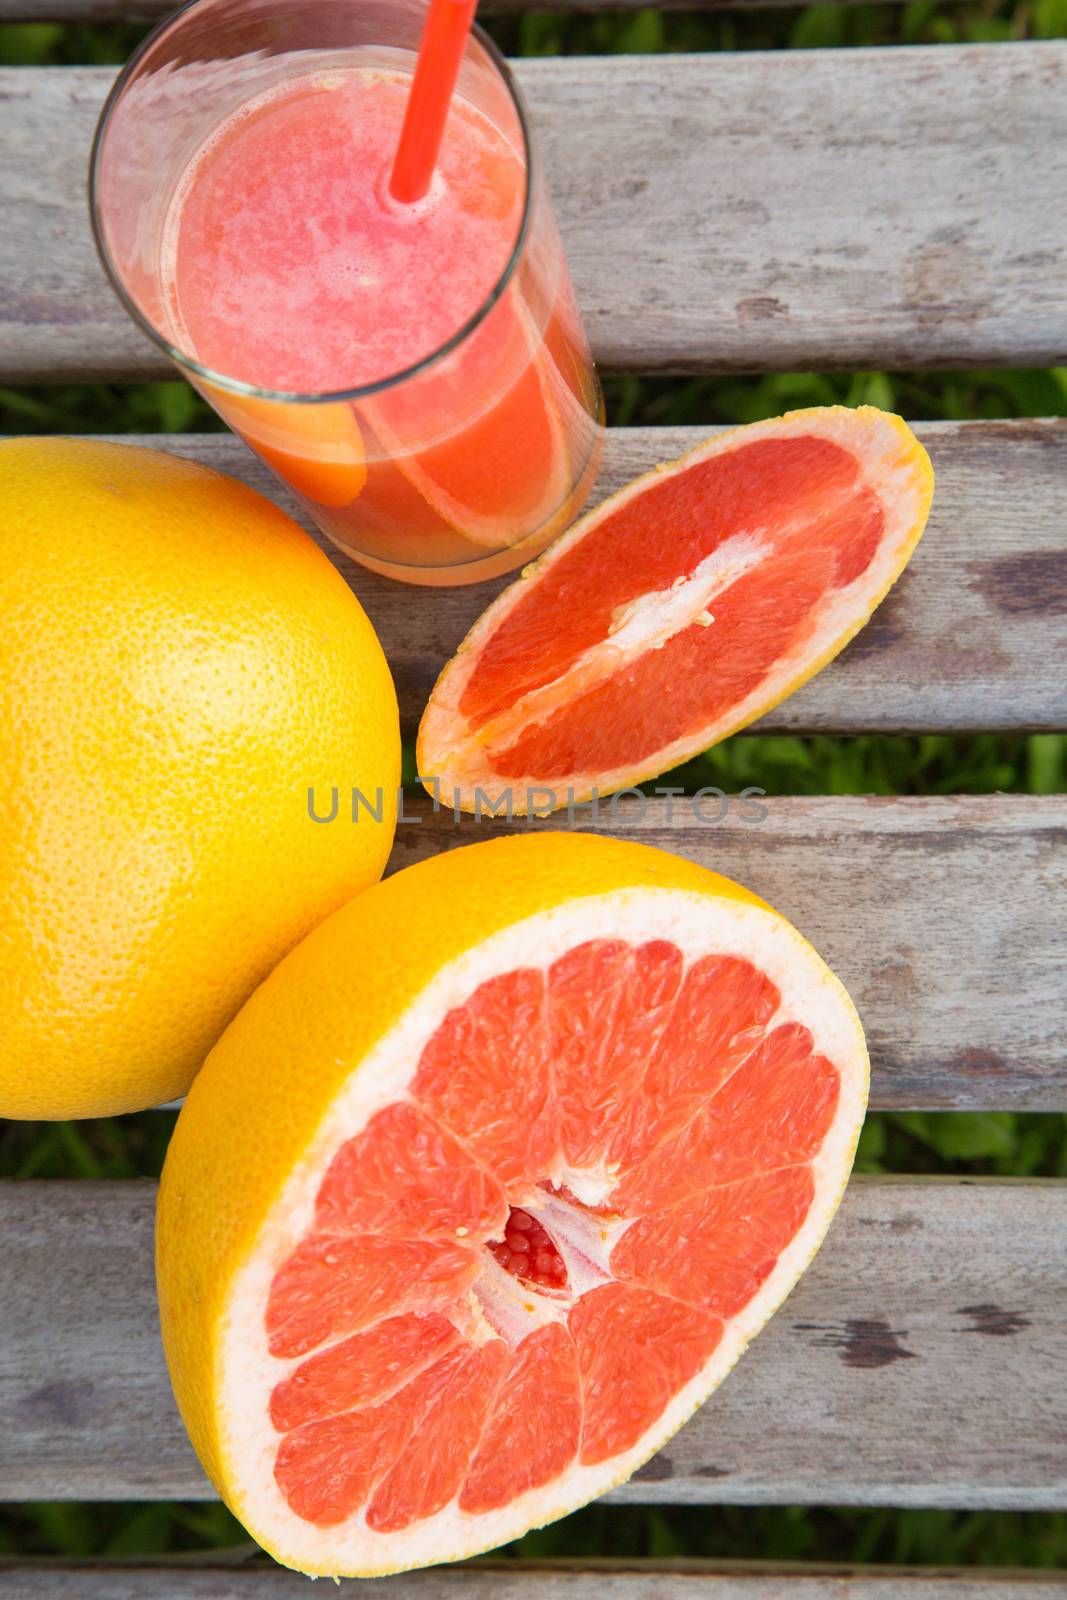 Pieces of grapefruit and a glass of fresh squeezed grapefruit juice on the wooden surface.top view